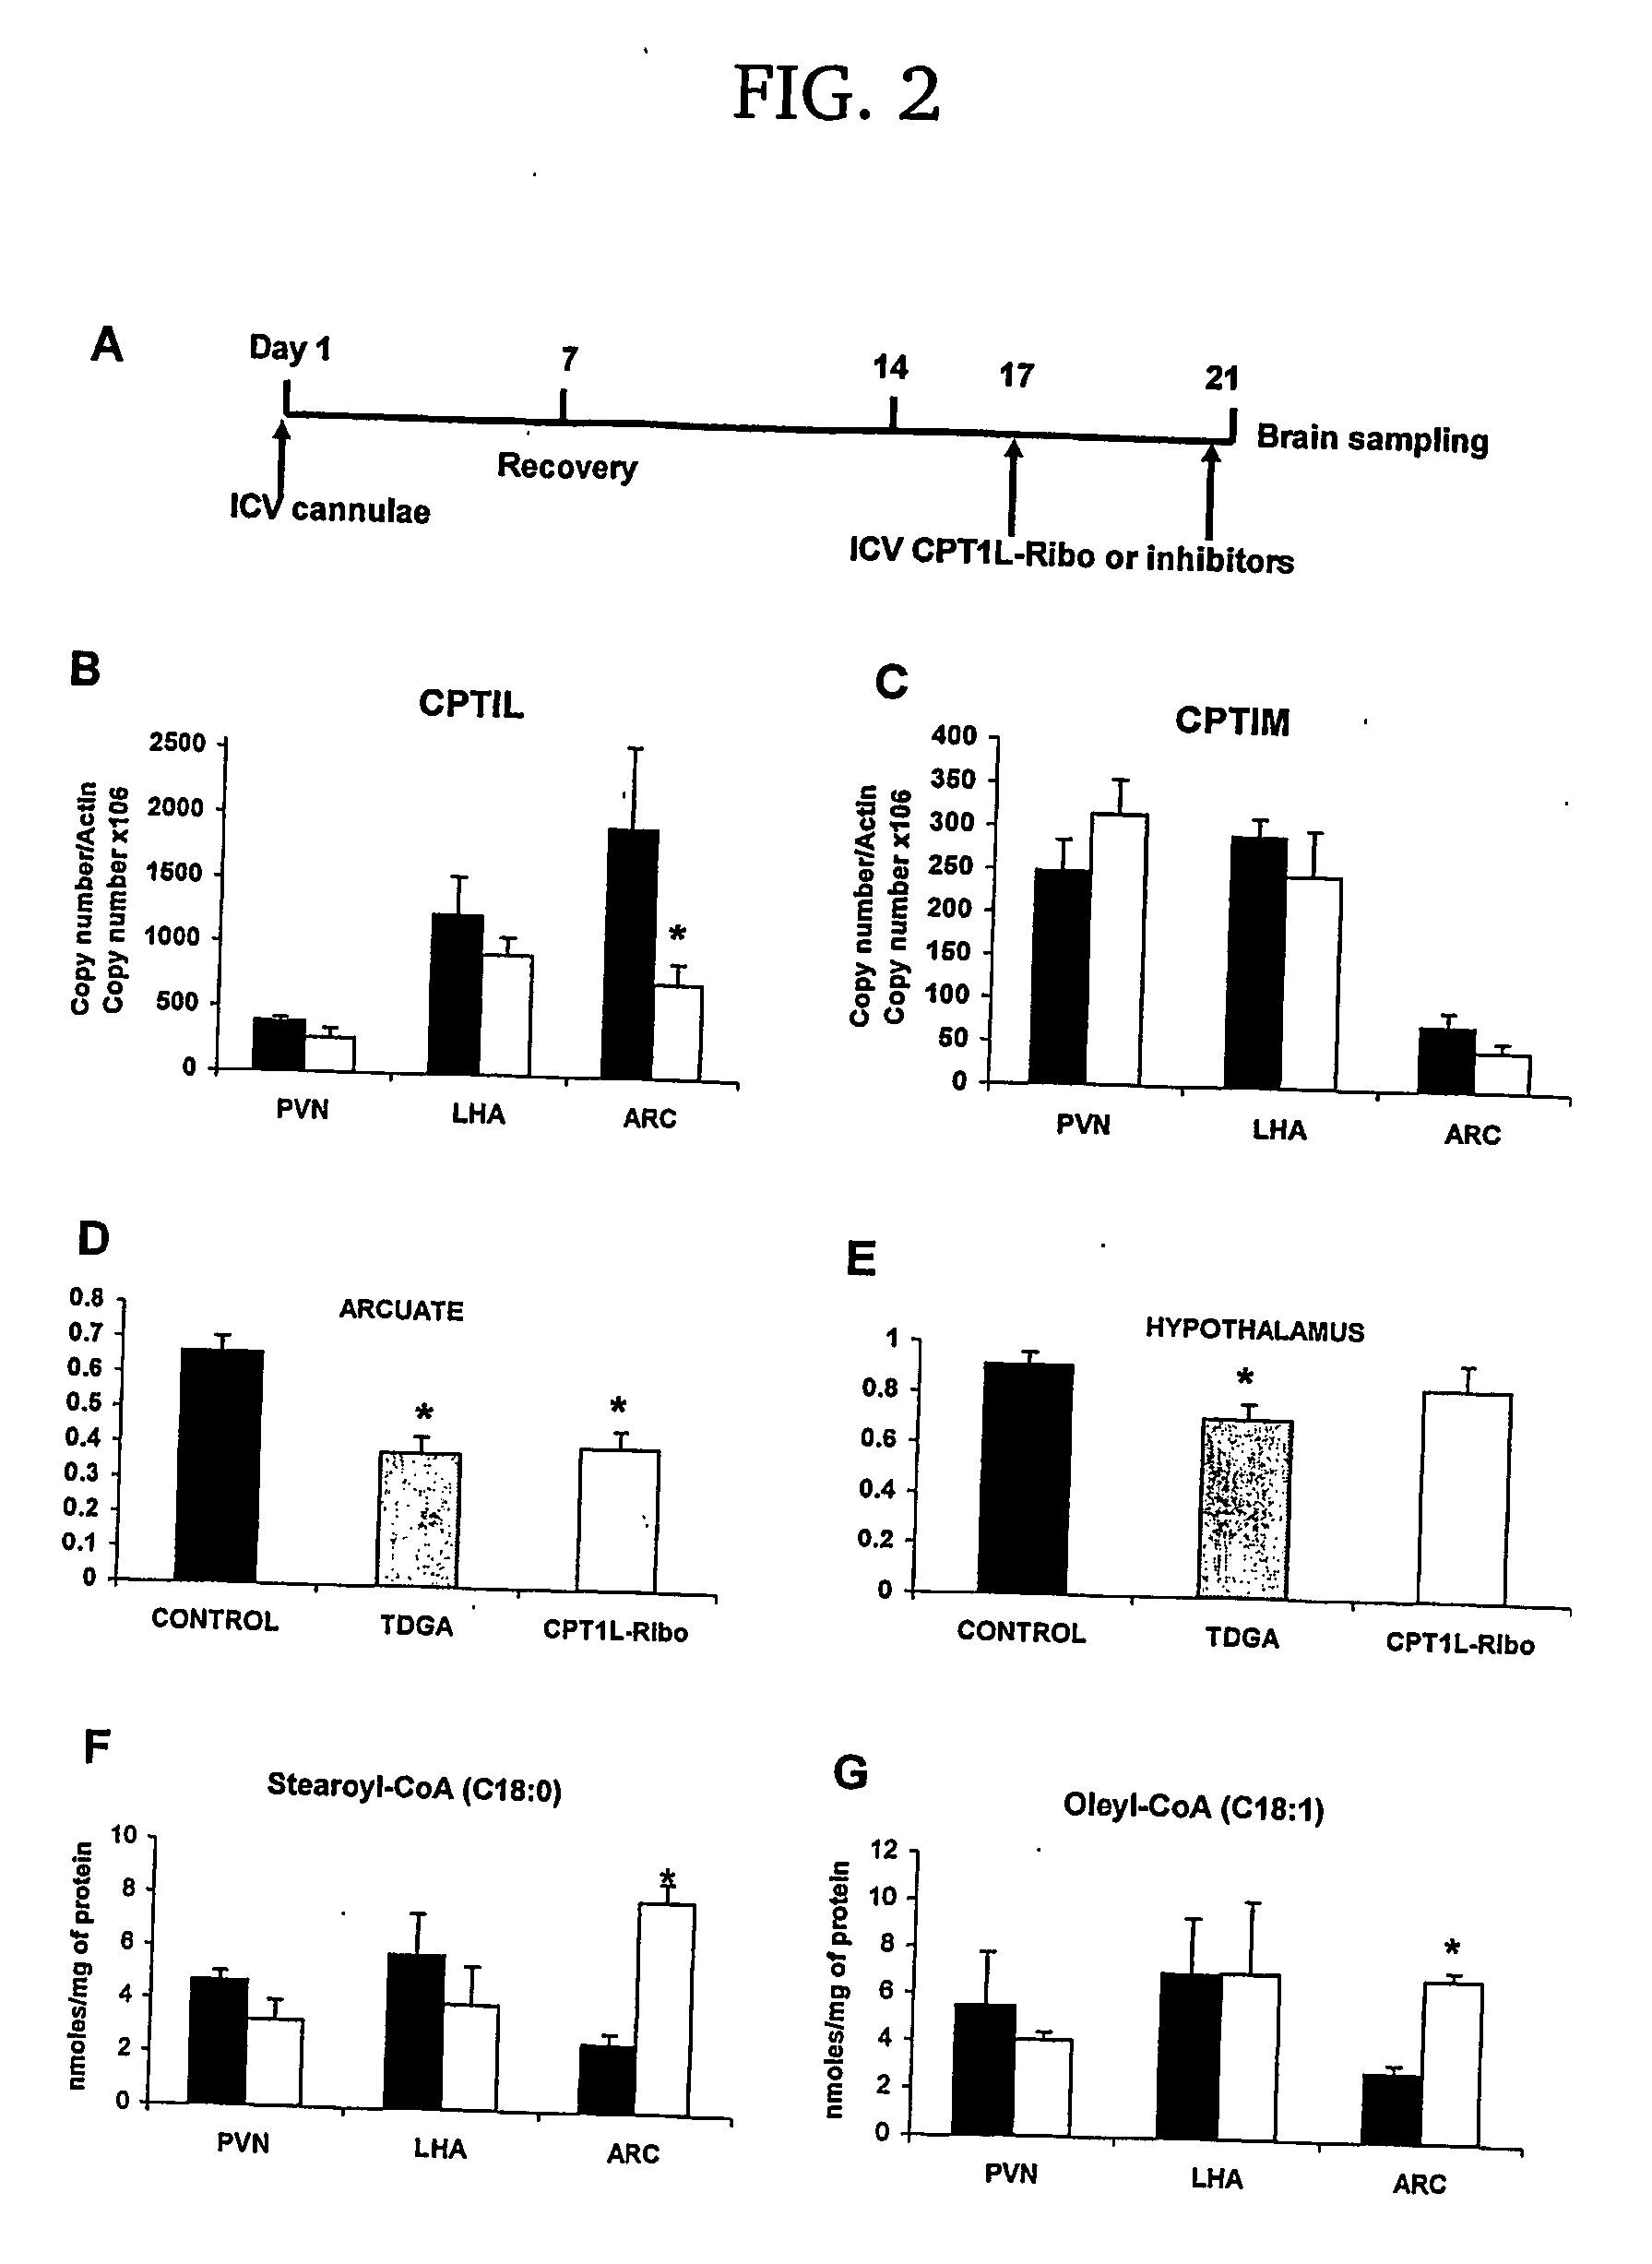 Regulation of food intake and glucose production by modulation of long-chain fatty acyl-coa levels in the hypothalamus